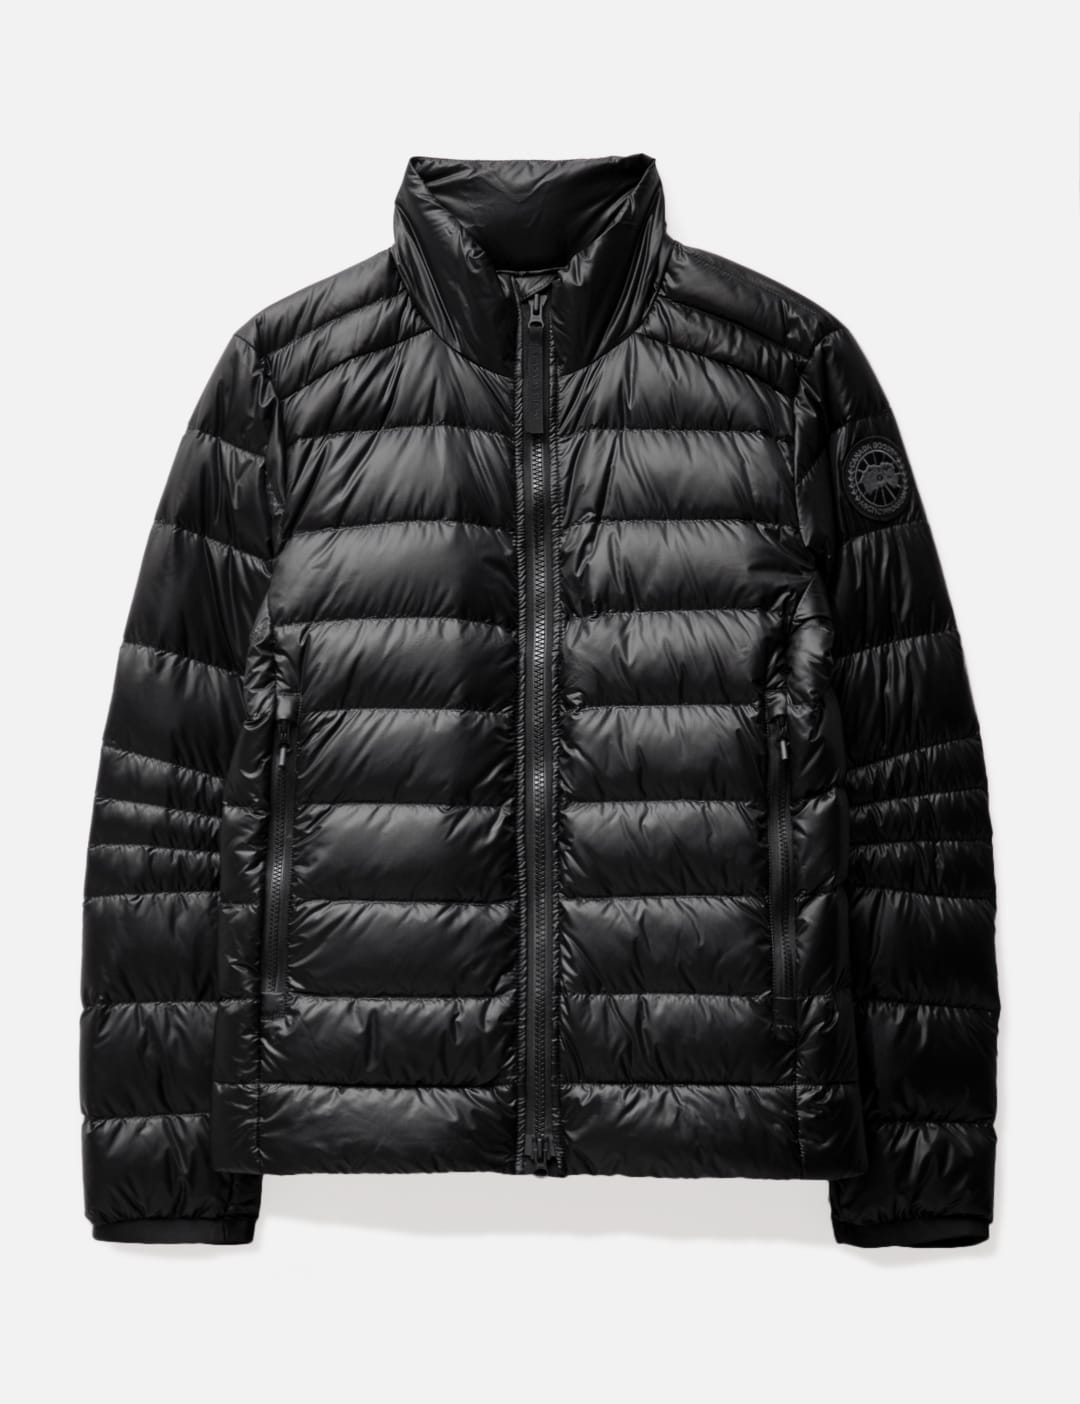 Moncler - Paviot Jacket | HBX - Globally Curated Fashion and 